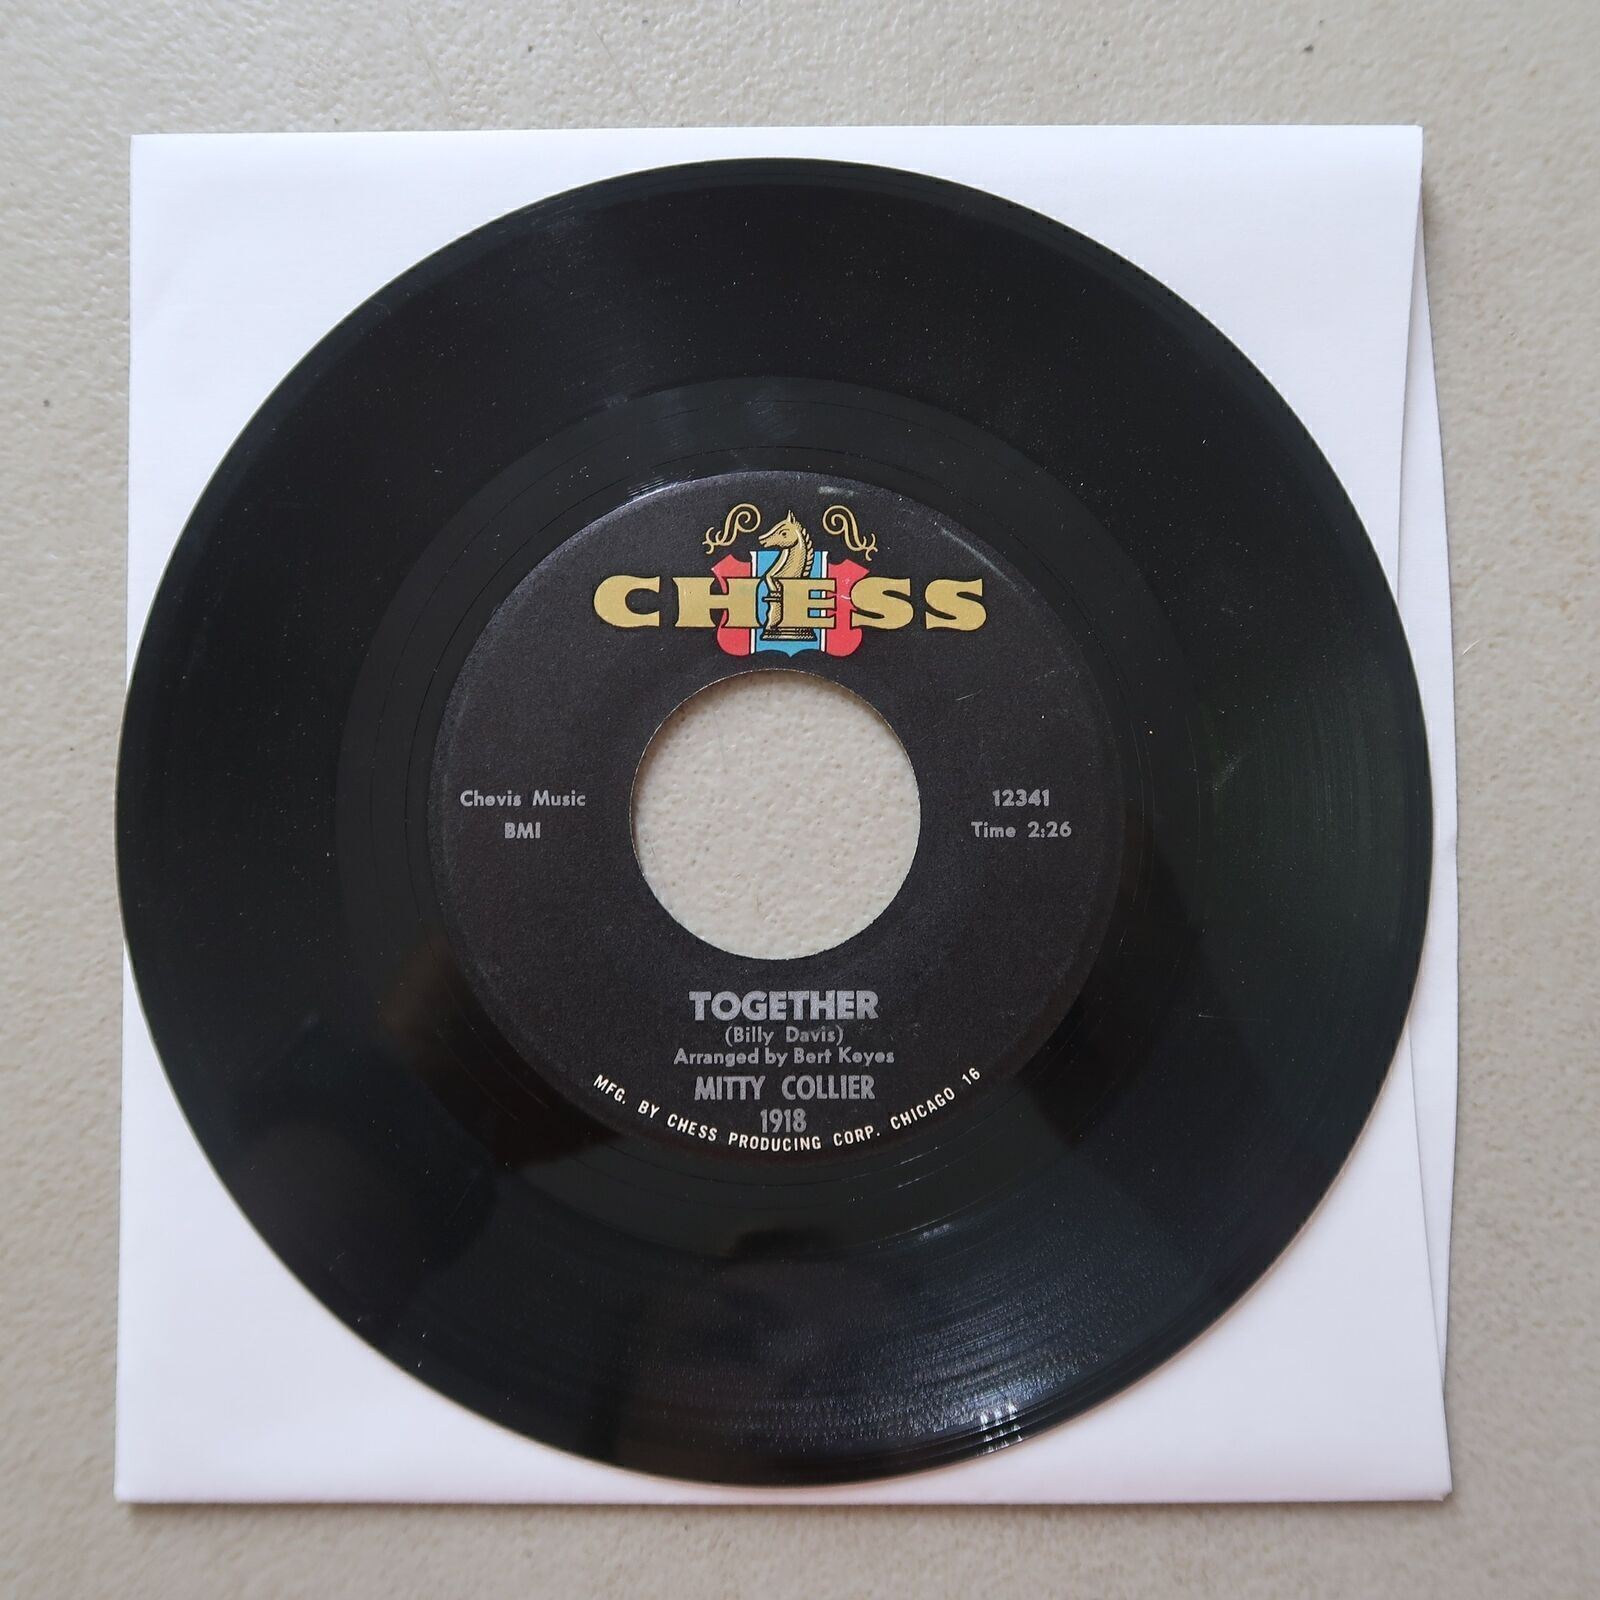 MITTY COLLIER TOGETHER/NO FAITH NO LOVE CHESS VINYL 45 SINGLE VG 17-1